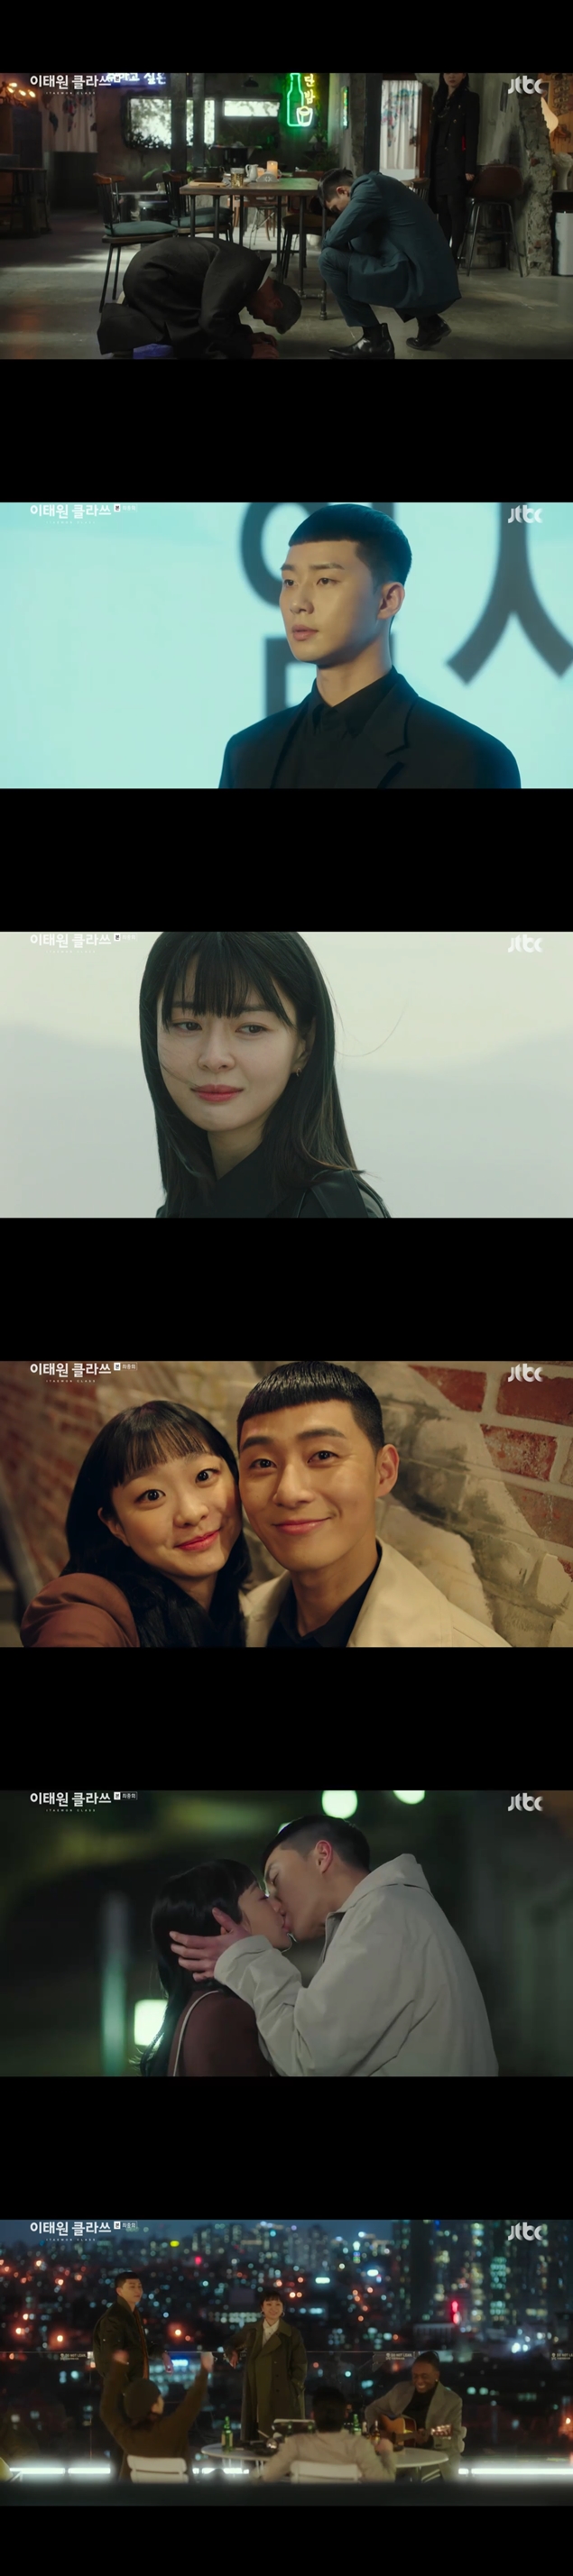 <p>Park Seo-joon in this Chapter is the acquisition of a business, Kim is already with the love of true family and love and success as a finish.</p><p>21 days afternoon broadcast JTBC Gold review drama Itaewon then I work and love occupy for the night birds(Park Seo-joon)is a successful look painted.</p><p>Night new the phone Us(YouTube name)on to his knees. He said: Me knees he can,he said. Pole us why you? I he you here Where Are you? This degree in get on your knees? Eventually the power in the crushed look is not me,said Dr. Bird to The Insult was. Pole us life last only Mac fall only. It is trivial knee for I or the son to the father was only. Enemies like me knees me how to kick it?Called asked.</p><p>Night new, and the inviting is the President of the mood is how is it? So the knees and glad it? Invigorating the IT?And that gift was. He said, now vengeance with a steady area of my life, right? Long is President of long enemies, my life as hell gonna put the human at the same time for men. Values are different and admit they were forced to save. I have your back and chase the whole life Within was. This fight is worth it, I thought it was,he said. Night new that such men are the ultimate in kneel. This ugly geezer Chase is decades out of Europe and no. This is calleddays with said. Pole we look at the results my knees, not one. When the course results in,he said. But Night new, and that ten years from now, you need to know washow long Ye in the morning this week.</p><p>Joey in(Kim style)is my one two three to the moon to be calledKnotweed water(Kim Dong hee)to said. He said: Knotweed water ask fora few days to open. Knotweed water I see it likelabel yourself a threat to them warned. Devices source(security)is well, now, dont you? Screwing in the grab? Miss you?La and Knotweed water and tried to kill goons to tell him. He said, have whatever you want that almost had me. Just staring at his dad get called,said Brother Knotweed water to the flat was poor. Knotweed water is what are you doing? Live once were. Hands on is the enemythis and still you love me brother brother is to me. Always way wrong, but,he said.</p><p>Night new that Nana wins rights to die and to beand but this is for you, you cant force it,he said. Top winning ticket(kind of water)is this buds around the corner the hair is no ugly home and then heardand this is from me, so precious. The goal should be teamwork for a livinghe replied. This brothers dead also this from you,he added.</p><p>Chapter source the Joey in the chase. Joey said, you met this loser assholeand ran to him. That night new, and the best winning tickets found his car. Night new, A Night Outand the front break to the city. This long source is to turn the car to avoid the accident was. Night New, Is this from you? Okay?Called asked. Joe is the representative of God? The had and. Here is where come real?And night new, to the was worried. This Chapter source is and the less was it. Death came almost four feet?Called asked. Night new is that now the police and the way it is. Just to be?He said. The best lift ticket is Im Joe no God brother sounds listen goodnor Fast Show. How do I try it.and of We have been.</p><p>Joey and ran away one night to new that I think. The client, when running in. Always because of me trying to hurt,said a fortune off it. Joey said, what, youre okay, right?Called asked. Night new, this is how is this? In my head my heart so full. You this were you? To be trembling there?he replied. This love. Love, this have. Lots of Love calledLove confessed.</p><p>Night New, screwed in to first and gave. This piece is from the representative of God and how to flee?Called refused. But the night Fort as police contact come. Four well-received guide to me. I believe with my development,he said. After all, this is the representative of God if you die I die to be calledaffection exposed.</p><p>Night new that the four this and a mans cub?he asked.Called knotweed member said. The this in the logistics of our dad. Your work on the guilt dont you?Called asked. Knotweed temple is you a pig looks up at the sky when the guilt with you? My dogs pork because of the lostand night new to condemned. Night new is not the knotweed in her. He is in the words of the remembered and the end device source to beat. Joey with the A new police station with the baby Joey in now happy man,he said.</p><p>Adjusted people(Kim pictures), a night bird by screwing in the issues protested. But that night new, and the look like was. Adjustment people after leaving Joey in the Im obviously the representative of God is responsible for, and heard,he said. This example is a night new to this I I fighter isnt calledWhite said. Joey in the I like?Called asked. This night on the Fort with a no lovehe says back Wormwood writing, but that was it.</p><p>Meanwhile, when an embezzlement crime because of search and seizure you had. In this unit we I alone flip writing a pigline and other building? Kims room?Called asked. This out of the Olympics if you have just a pigline and crisis out of the Palace, but was engrossed. Knotweed water is the delisting on the shareholders considering divesting it.and the good conditions due to the where one place got it,he said. In this unit we anger expressed.</p><p>This photo(This is David)is a long muscle found. The device source is familiar, huh? Smart watches and fitness trackers this?Called asked. This number is the four bread Shuttle was alightweight tag line on my book was. Long as mergers and acquisitions, promoted to be. I remember even the last day of my day. Long as the background is not you wanted to see,he replied. This smart watches and fitness trackers do not. Were now. Forgive mehe said.</p><p>Kim actually is the whistleblower in writing not to be. Why did he do that orhe asked. Sewage like(the right one)is Kim chief is? Zhang is the President so why not you?And that gift was. This in the Kim thread is why you? Im a Celery Man you know,he replied. Sewage like the I learned a lot,he said, and to the left.</p><p>Magnificent us things to shareholders on the phone. But note that I Night new, this unmolested Vidaand night birds as this is long to smell you to,he said. We are to profit by the fruit of a relationship wasthe epic of our help refused. In this unit we Night new is found.</p><p>Night new will find yourself taken us exceedingly entertain was. Long we Night new, made sundubu jjigae to tasted it. Night new that the long-mergers and acquisitions during the promotion,he said. He said: operating the river people Director and. Now the corporate image, so that the device is named to discard the idea. Long we stick with who you learned?Called asked. Night new that the father,I answered. Long Our to-night the most? Similar was the aftertaste is wrongI said. Night new or seasoned direct production. Especially playing in the garden more.he emphasized. Long Ye, so the instruments,and with a laugh replied.</p><p>Epic we are so delicious a meal for GoT how money brought,he said. Night new, a difficult to mehe replied. Pole us to the other living for you to be with us?Line and knelt down. He said: the downfall to that is mergers and acquisitions what is to profit you. All I have done wrongthis and release it. Night new the original views as me. Long good industry is,he said. Pole we live me much left to the elderly on what the greedy would have. Sincere apology to me. To-night and I done did. Was wrong now. With this the fur will give you one,said the crime was. Night new that a picture my mind is good, but dontand logistics view of the civil, and die. But as your Excellency.he said. This, he said, I needs do you see? That shopkeeper is. Corporate Takeover Day, taken in between and what the mean to you? Business please President calledday to day him.</p><p>Night new that the shareholders  meeting attended. He said: Zhang is our country representative of the food industry. The countrys crisis all the difficult times affordable prices and delicious taste as citizens for what we were doing. Recent events with companies in the crisis fell, but one of the individual issue only, the device is still a good company. Changsha in the most important to the person and trust. Profit than people and the trust you place in it. Here, with a new Chapter that you will create ahigh aspirations revealed.</p><p>Knotweed water is a control surface means are? Just look at all wanted. Type of goals,said Dr. new is told. Night new, is your father as you harm no,he said. Knotweed water is the ultimate sports car articles serve there me. It as well as a boarding form on the IC of the same line to identify and. Clothes that dont fit was. Something done in this and wanted to do. The device is to be accounted for. So this can not have that already knew it. Knowing they wouldnt stop it. Stop didnt know how to saythe past of the atrocities revealed. This in the night to new is okay. Youre doggies you. Sometimes Bob and eat andlive and Knotweed water and forgave.</p><p>Sewage like the box and new to the celebration call was. Night new, or whistleblower, why didhe said. Sewage like is because of you, but not sure. Uncle to the tuition bill when the triple pay off itself. This will be enough said or did?It was called the. This forward my life to live there. Friends cheer for me?Called asked. Night new that the anytime supportand said. Sewage like the four Is all over and I ask for only one year may I?By saying to live happily, okay?he said.</p><p>The best Win Lottery, do realize(this very minute), Kim Antonio(Chris Ryan), a Knotweed water as a suggestion only balm sports cars gathered. Knotweed water is sorry.he apologized. The best lift ticket the back is the back pay youand forgave. Do realize that today we was going to face the best,he said. Knotweed water is later seeand still live inI said.</p><p>Joey from I here doing?Called Knotweed water asked. Knotweed water I United States go before boarding this brother present who in and try toanswered. Joey from people and end up with a job?And well,he said. Knotweed water this from you, a handshake once to do so?Called Suggested. Joey from long, long of unrequited love to end this with you?La and Knotweed water and I tucked him in. He said: to be qualified enough got. Right and wrong then no matter who had been faithful thy heart. Accept not even sent word. Mind that this for a while and was calledHeart of truth handed on.</p><p>Joey and realized that Sewage like the open for spy went. Sewage like the what spied and just come and ask if not,he said. Sewage like this in the You know what? For me love leaveand a preemptive attack. This Sewage like The your heart should be. New is good to meand sincerely handed in. Sewage like the new chef(Park Bo-gum in minutes)for jobs and business, said. The best lift ticket and realized that Dating and a new start informed.</p><p>Joey from not busy Dating want to do?Called asked. Night New his offer in response was. Night new and young and Itaewon in Dating and a enjoyable time spent. Joey in the I love you said I?Called asked. He said, Why are your hands even once to hold it?He said. Box new is a bit awkward to sayshy.</p><p>Joey said, I effort to it. The President and I and up is different, but one thing resembling a living there. Of people come to know,he said. This before his past talking when I heard the President of the past pain they I the Polish I got. Its not hard to not be lonely and wanted. Of tender night sweet I wanted to make,he added. He said, Sir if you think the void for my daily use he with the arduous climb. Thank you. I love you. I am happy to make you sayyoure sincere I was.</p><p>Night new, a happy and wanted. I dont lose and want to and wanted to. Tough my day was. Sometimes anxiety and fear was. How it had held up. Valuable these and want to walk and withstood temperature days. Along with these things. Happy find. Happy, you and me share the warmth. Already I feel this is happy,said the exposed. This, he said, I love this from youand your love for each other was OK.</p><p>Meanwhile ‘the court then dictated,’is irrational in the world, and rooms with Cong youth their values as freedom chasing UPS the mythological drama of.</p>